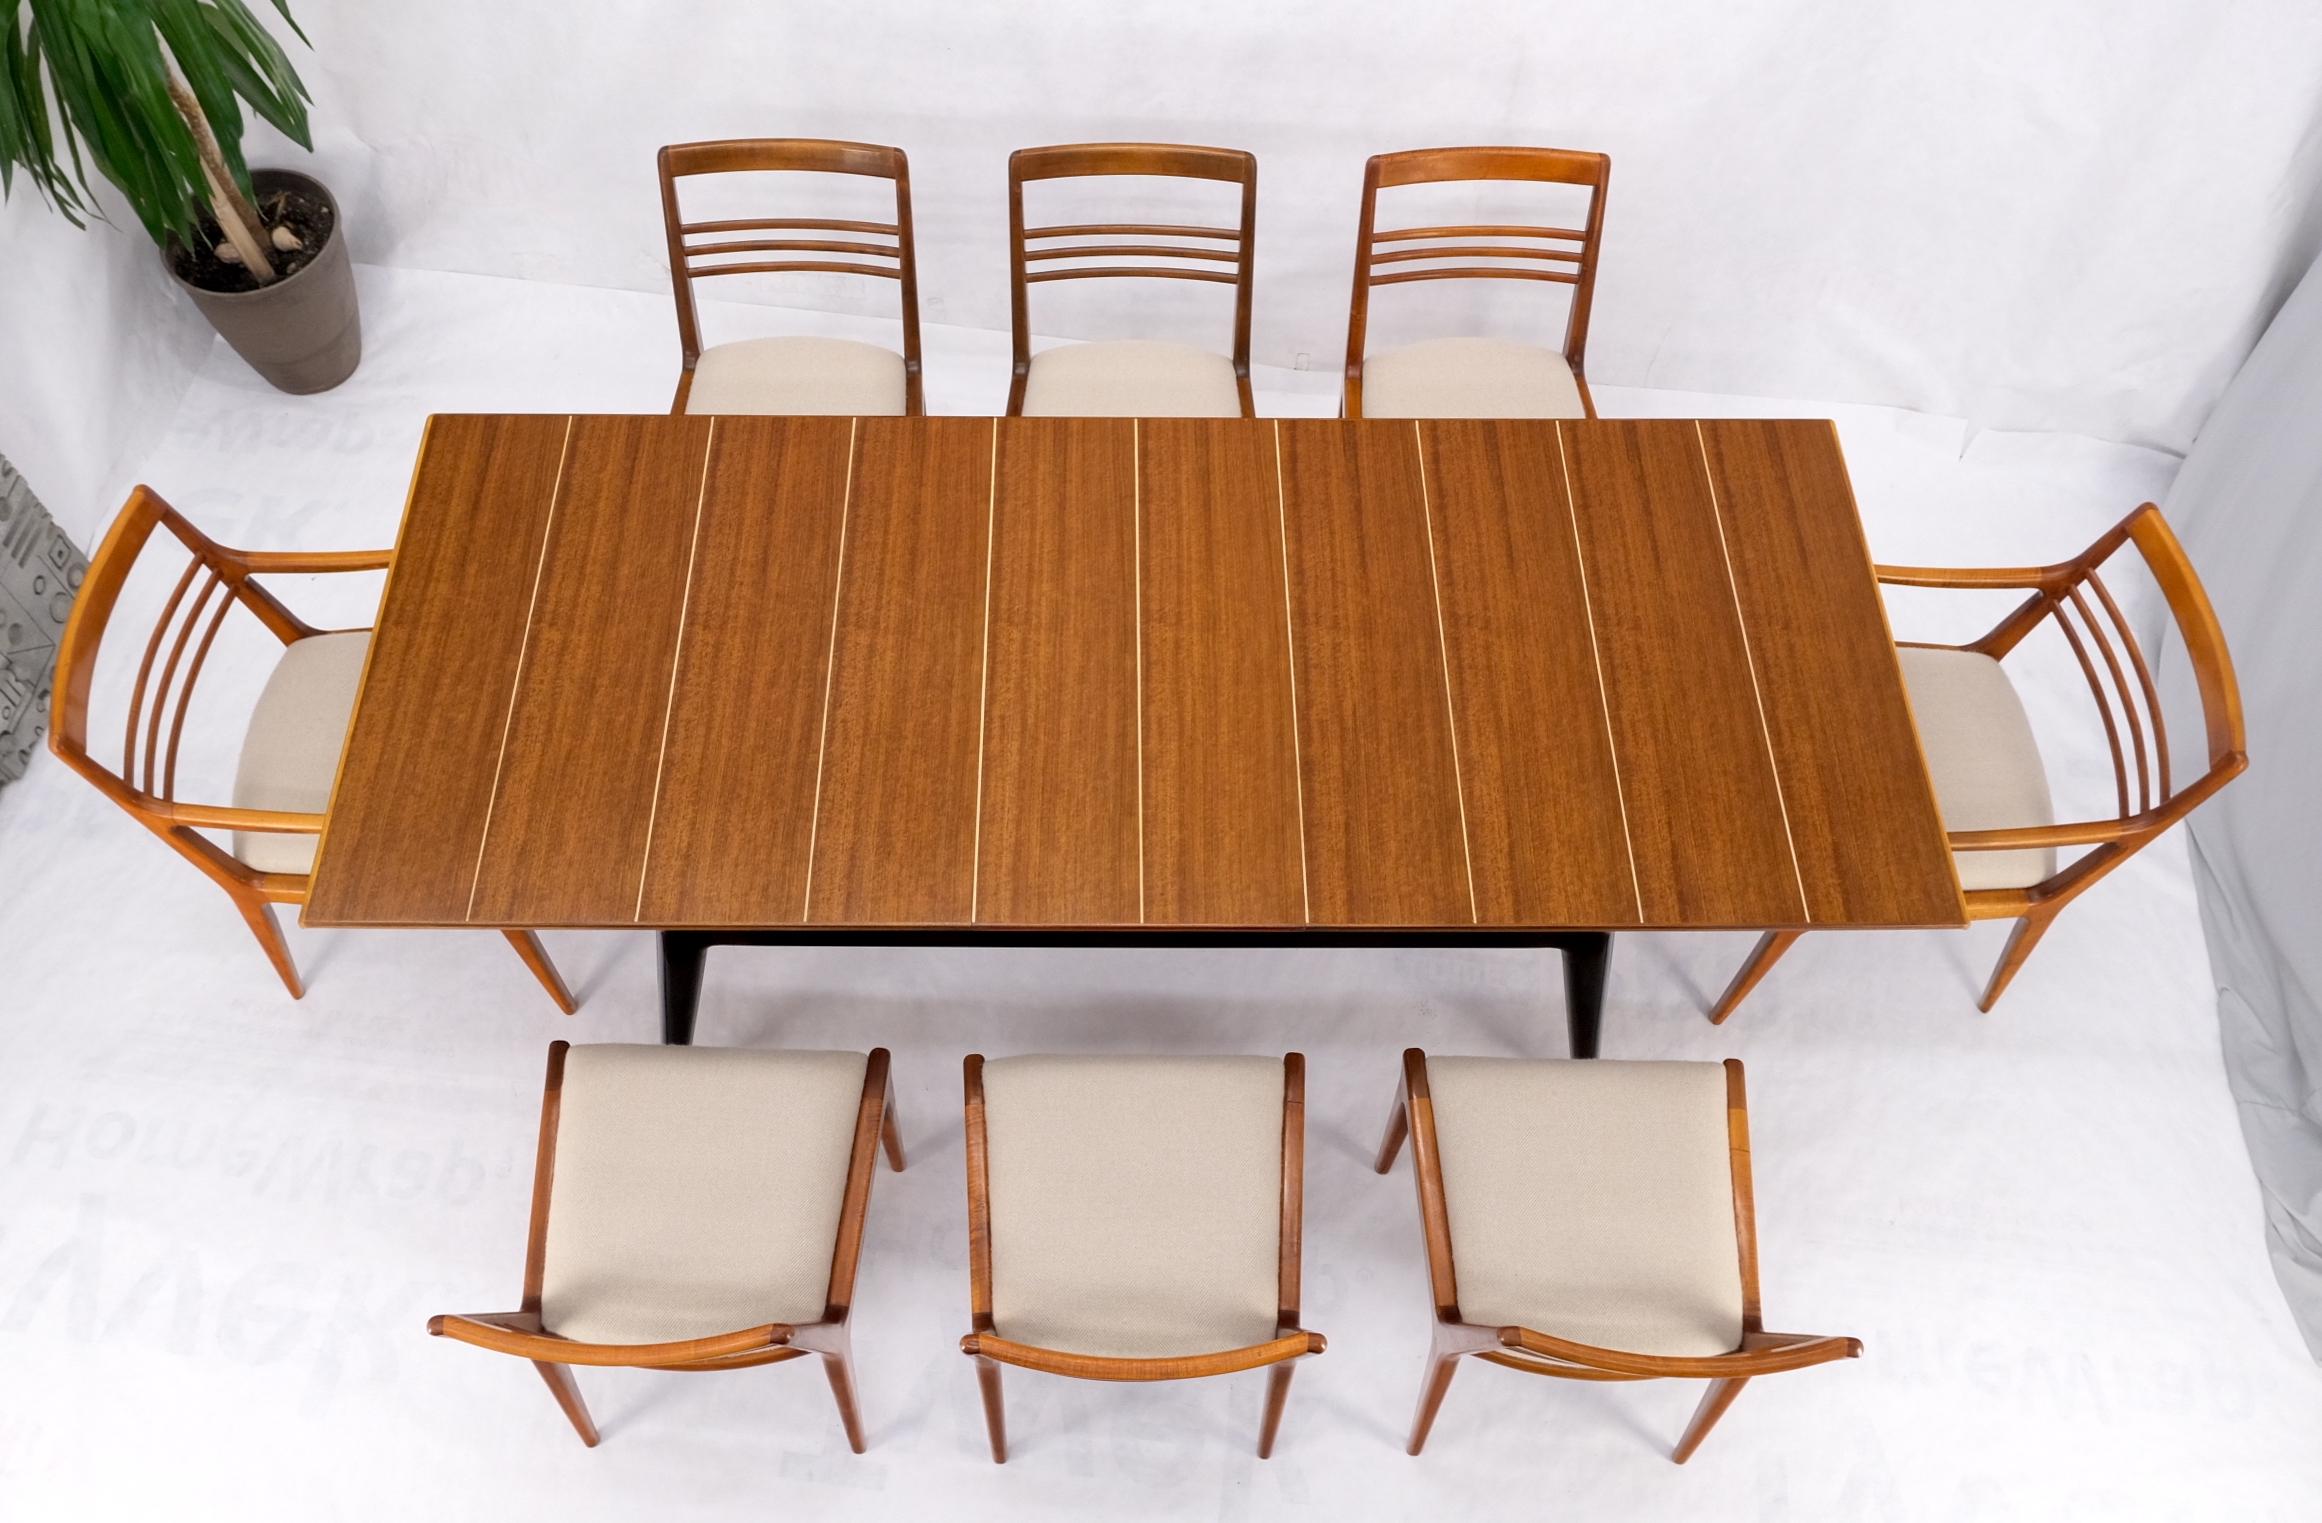 Italian Mid-Century Modern Dining Table 8 Chairs Set New Linen Upholstery Seats For Sale 12